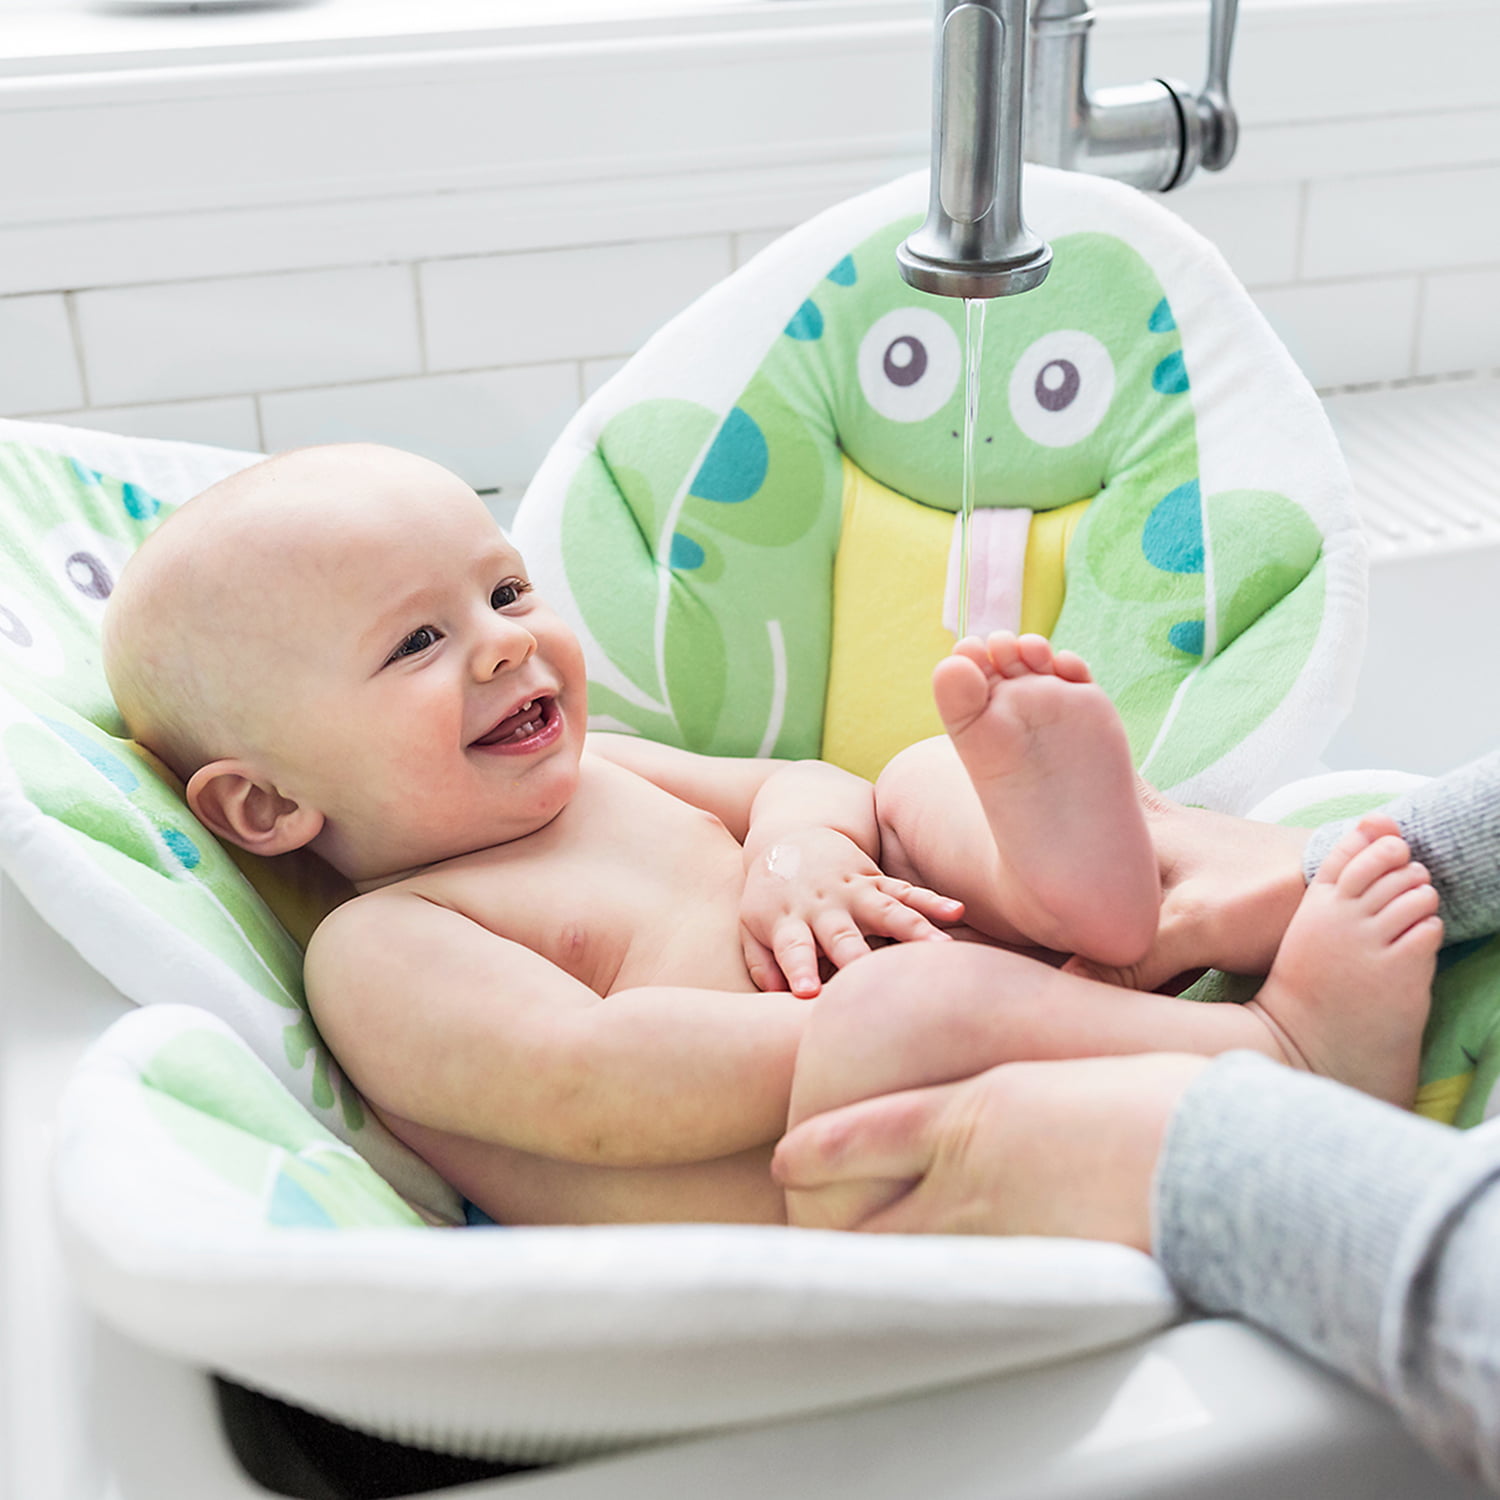 Green Baby Bath Time Chair Support With Safety Grips Bath Seat 